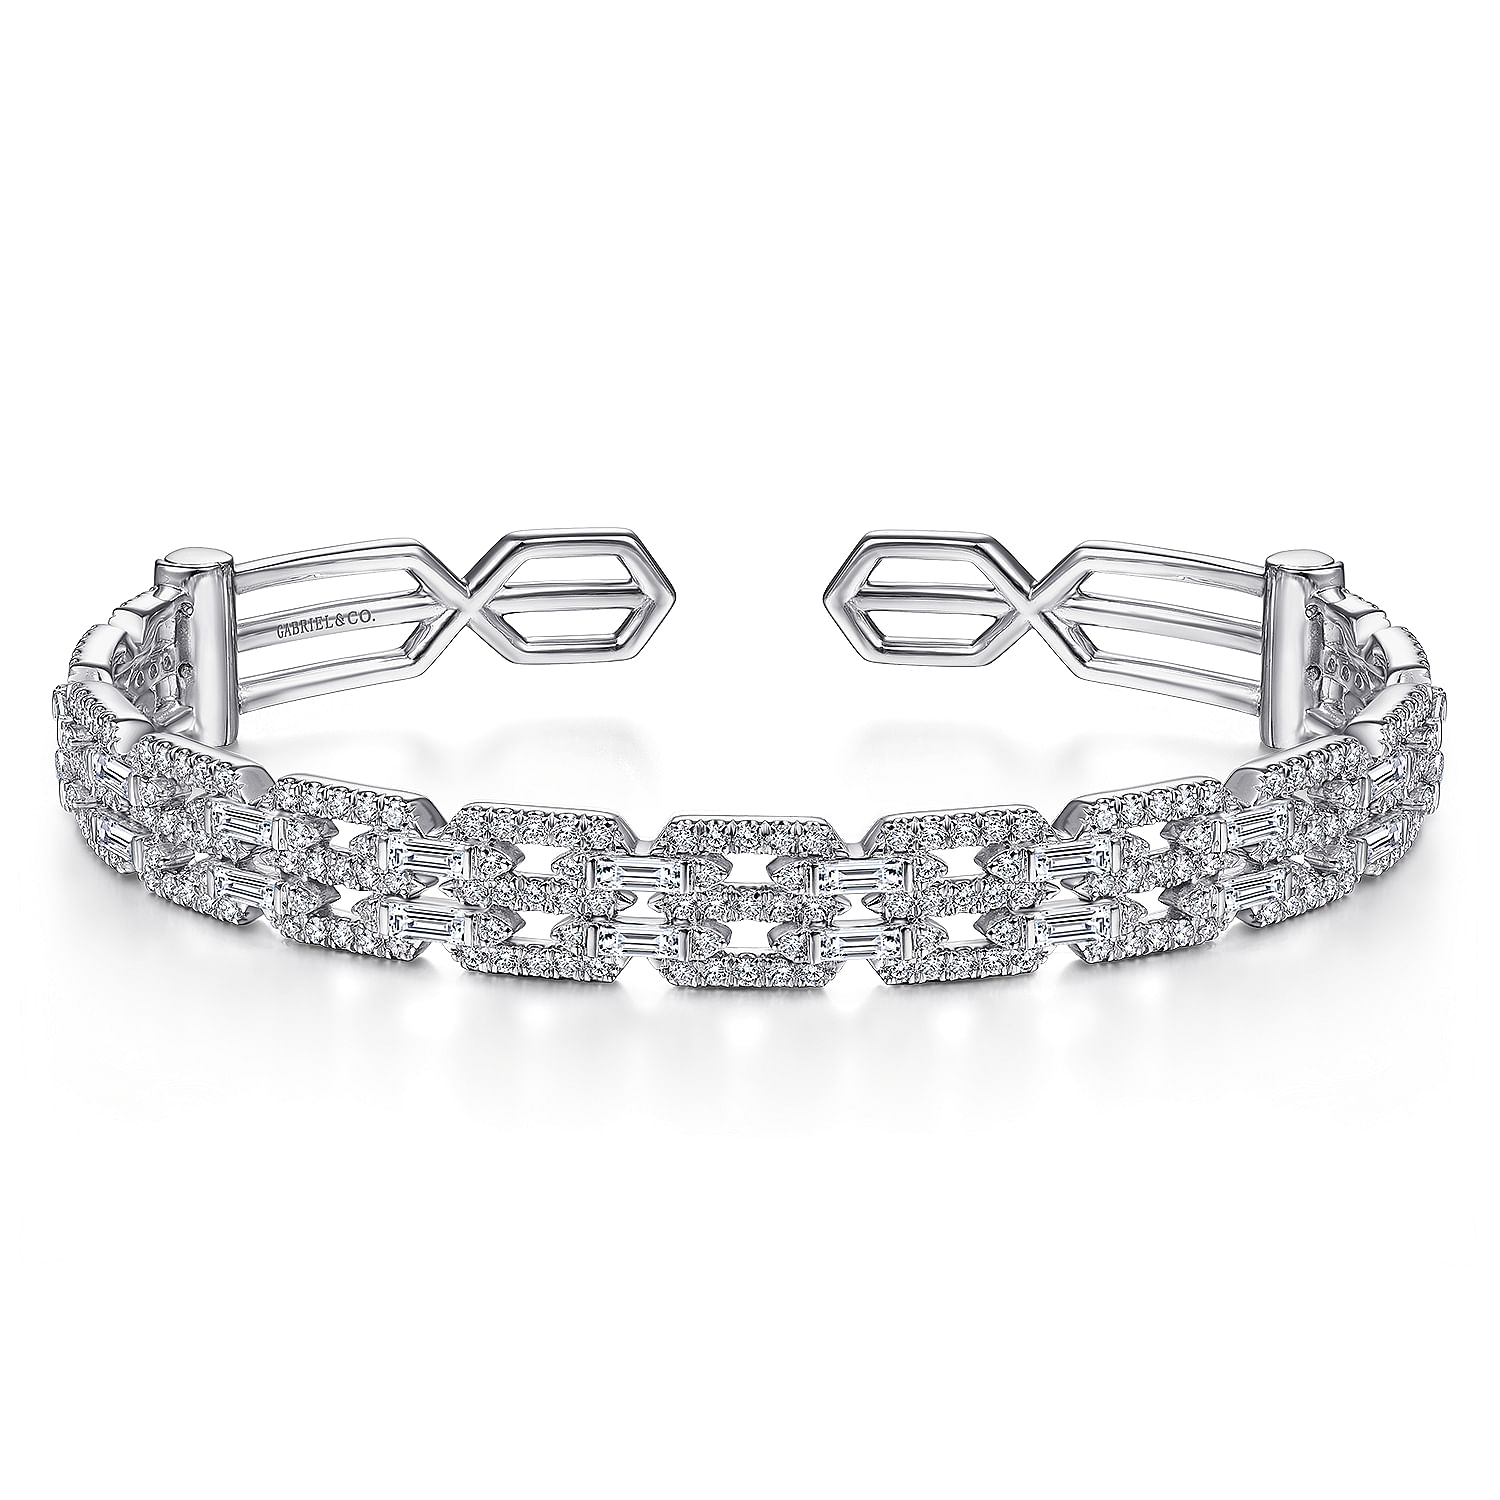 14K White Gold Diamond Chain Link Cuff Bracelet with Diamond Baguette Spacers